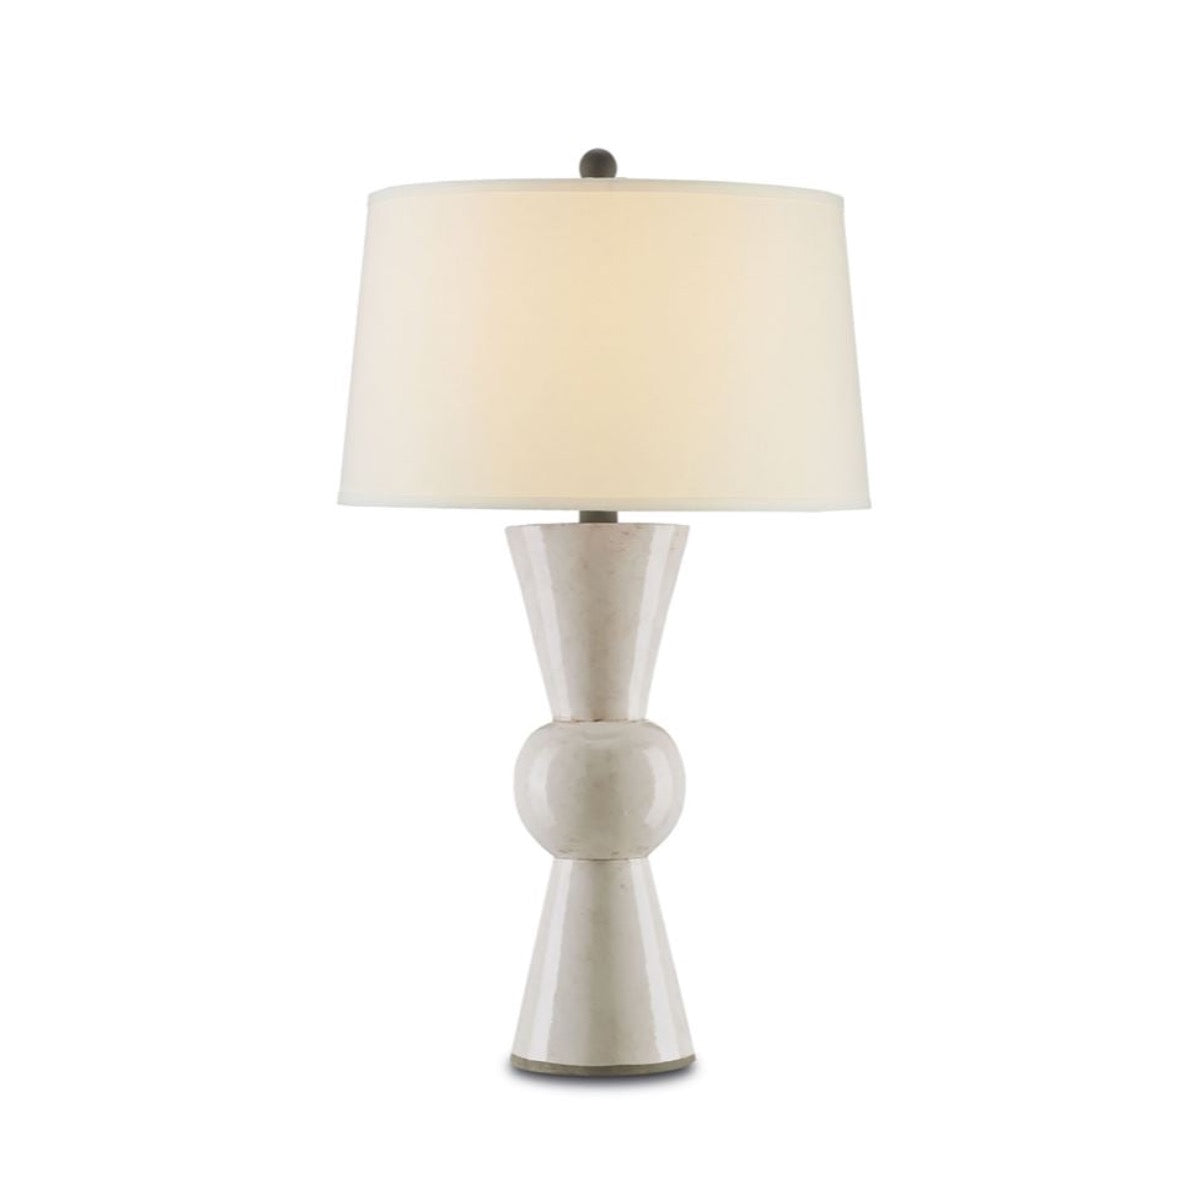 Berkeley Table Lamp. Front view.